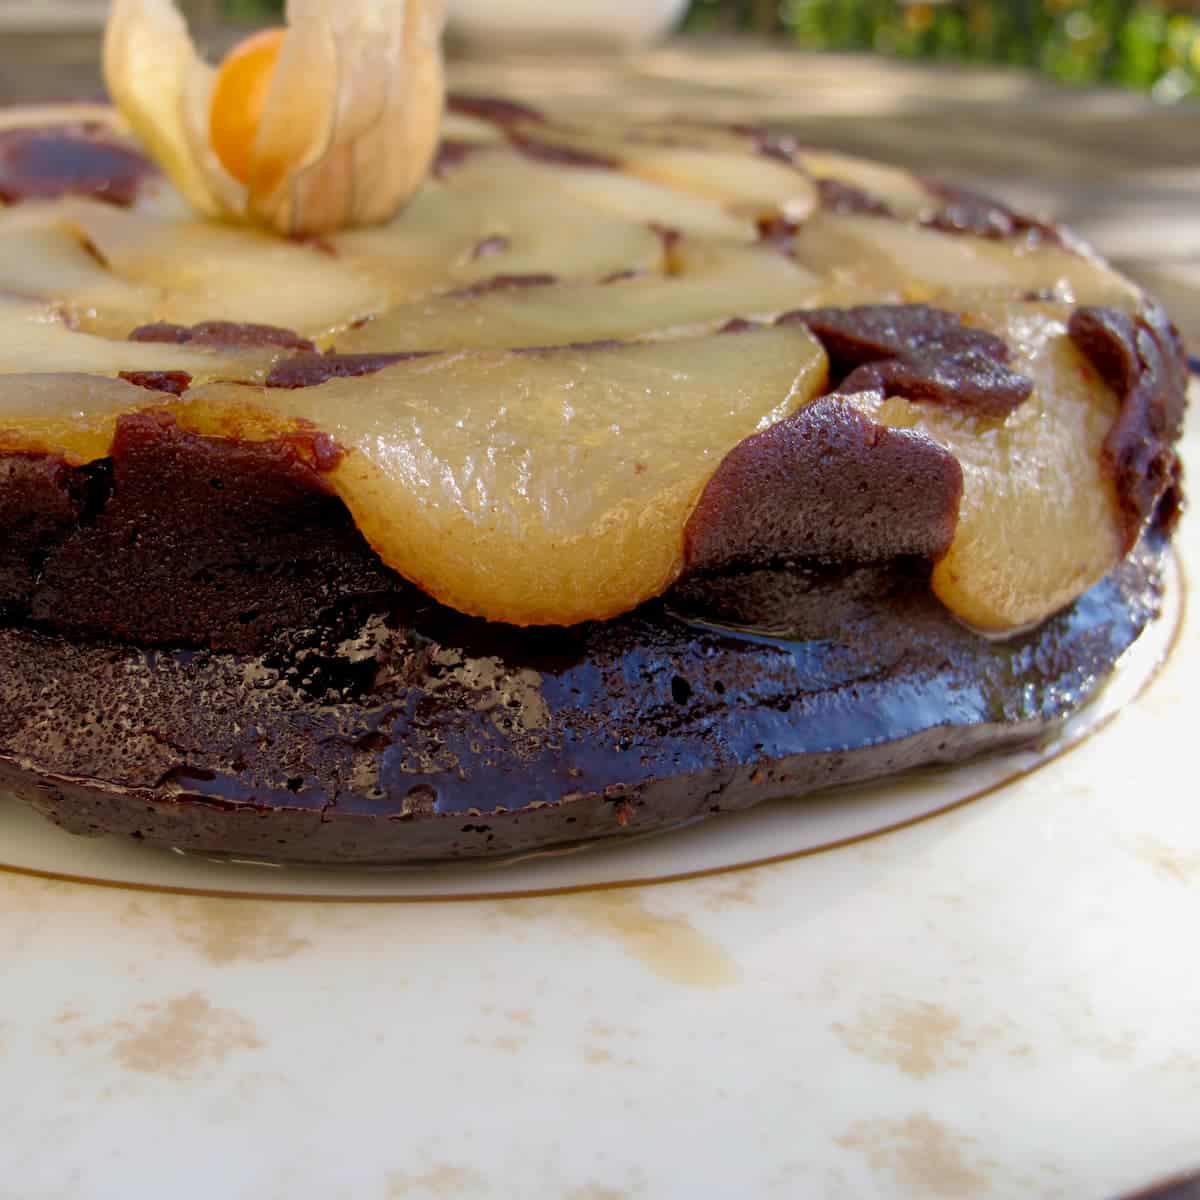 close-up of pears falling over the edge of a dark chocolate cake